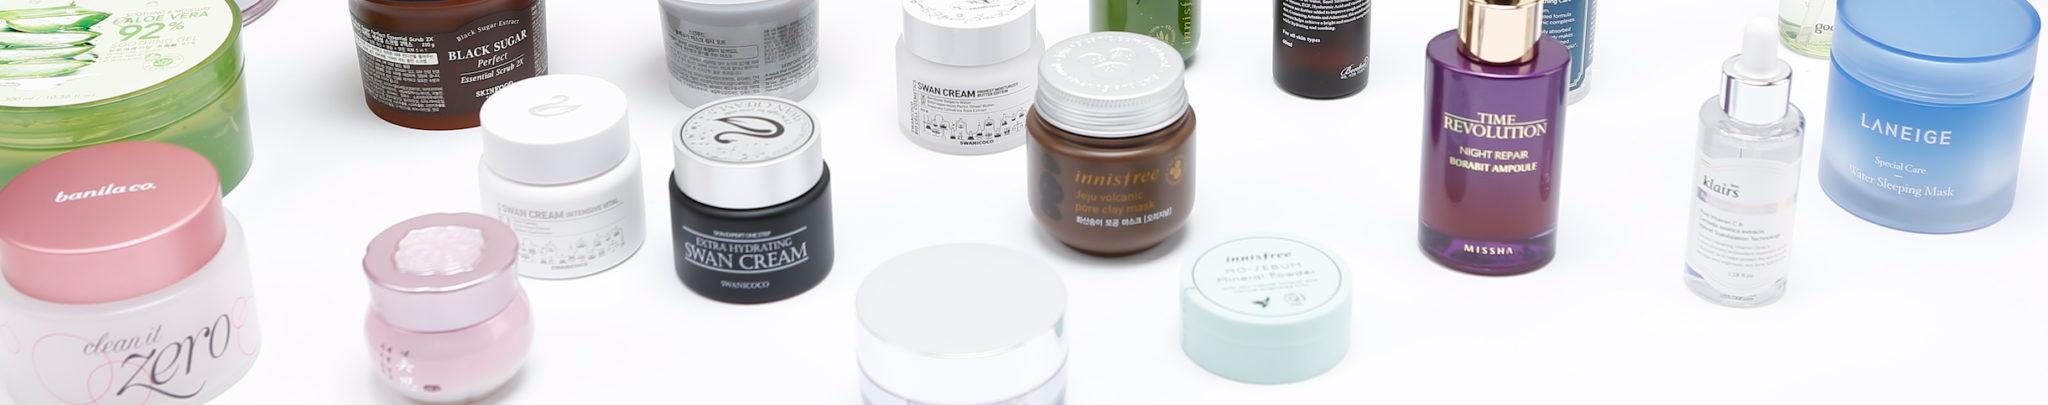 10 Cult K-Beauty Skincare Products Everyone Needs to Try Now